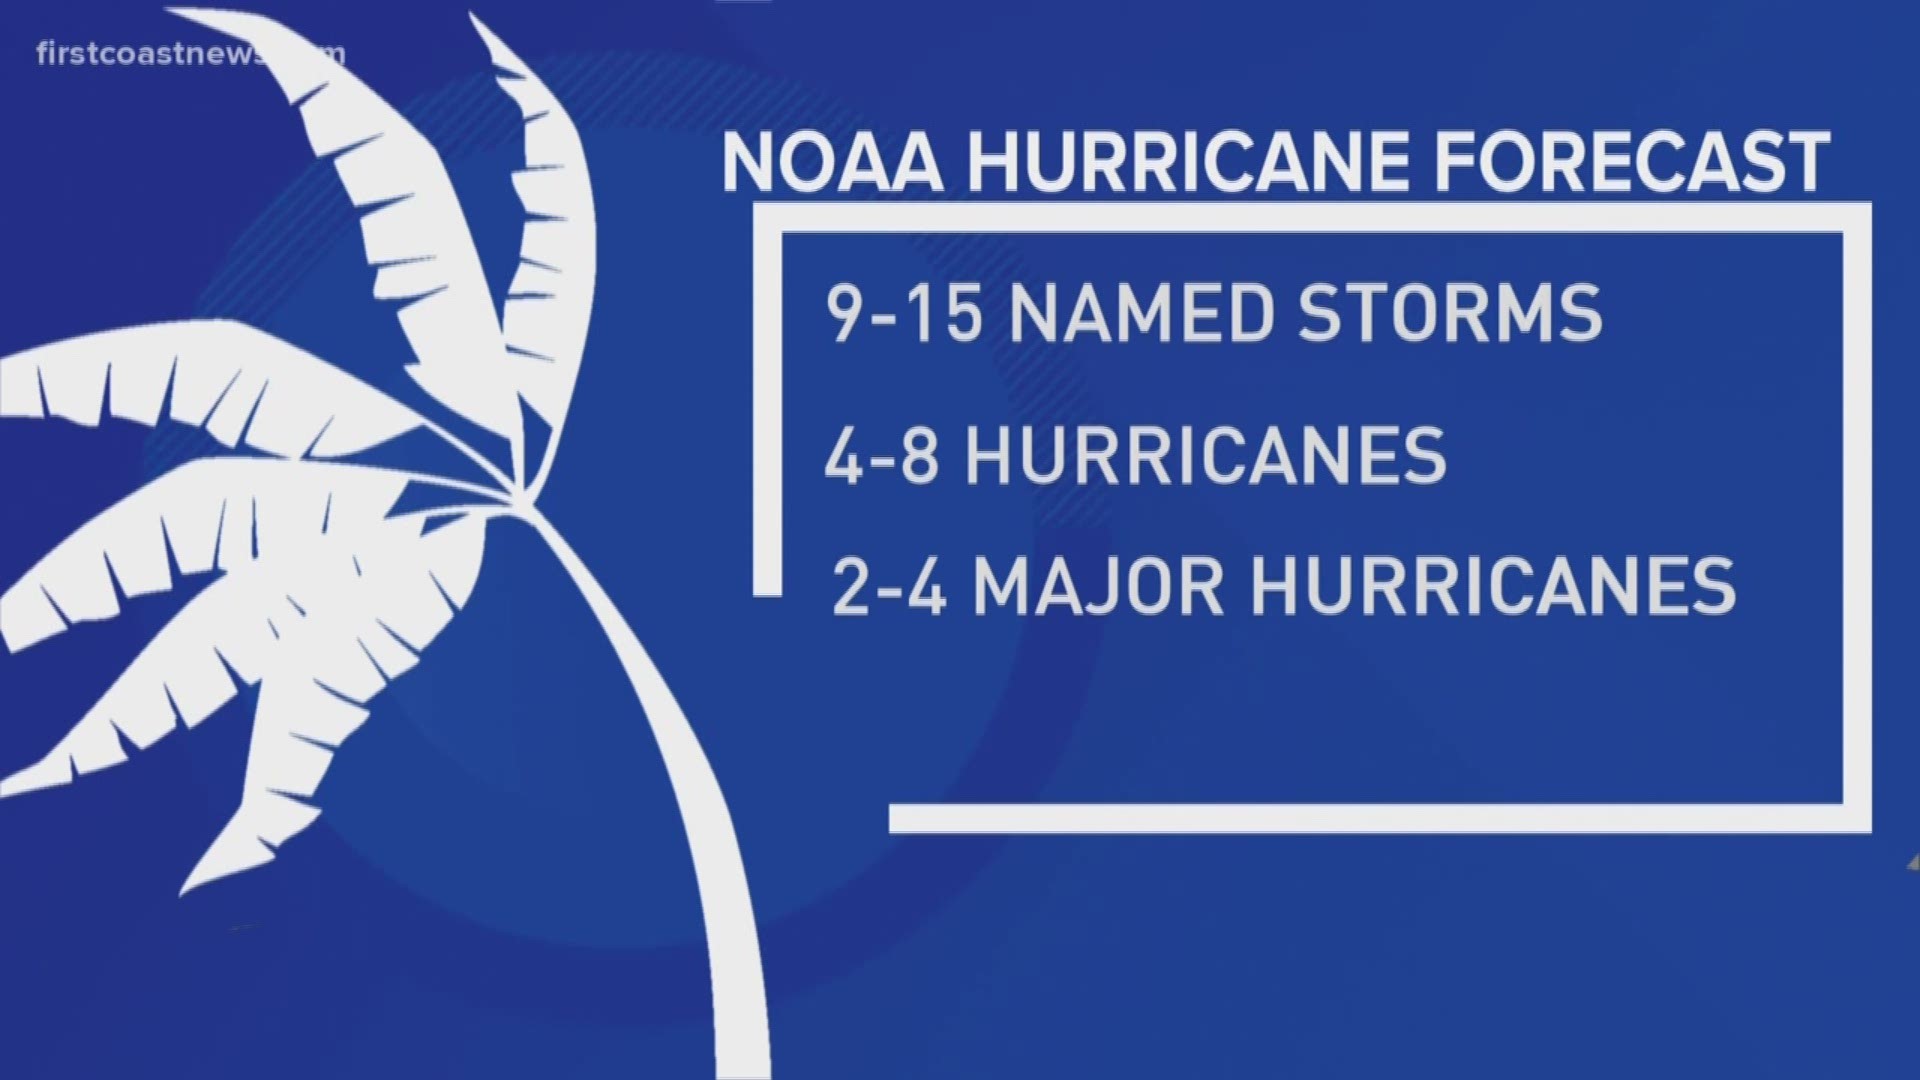 NOAA predicts a range of nine to 15 named storms (winds of 39 mph or higher), with four to eight potentially becoming hurricanes (74 mph or higher).